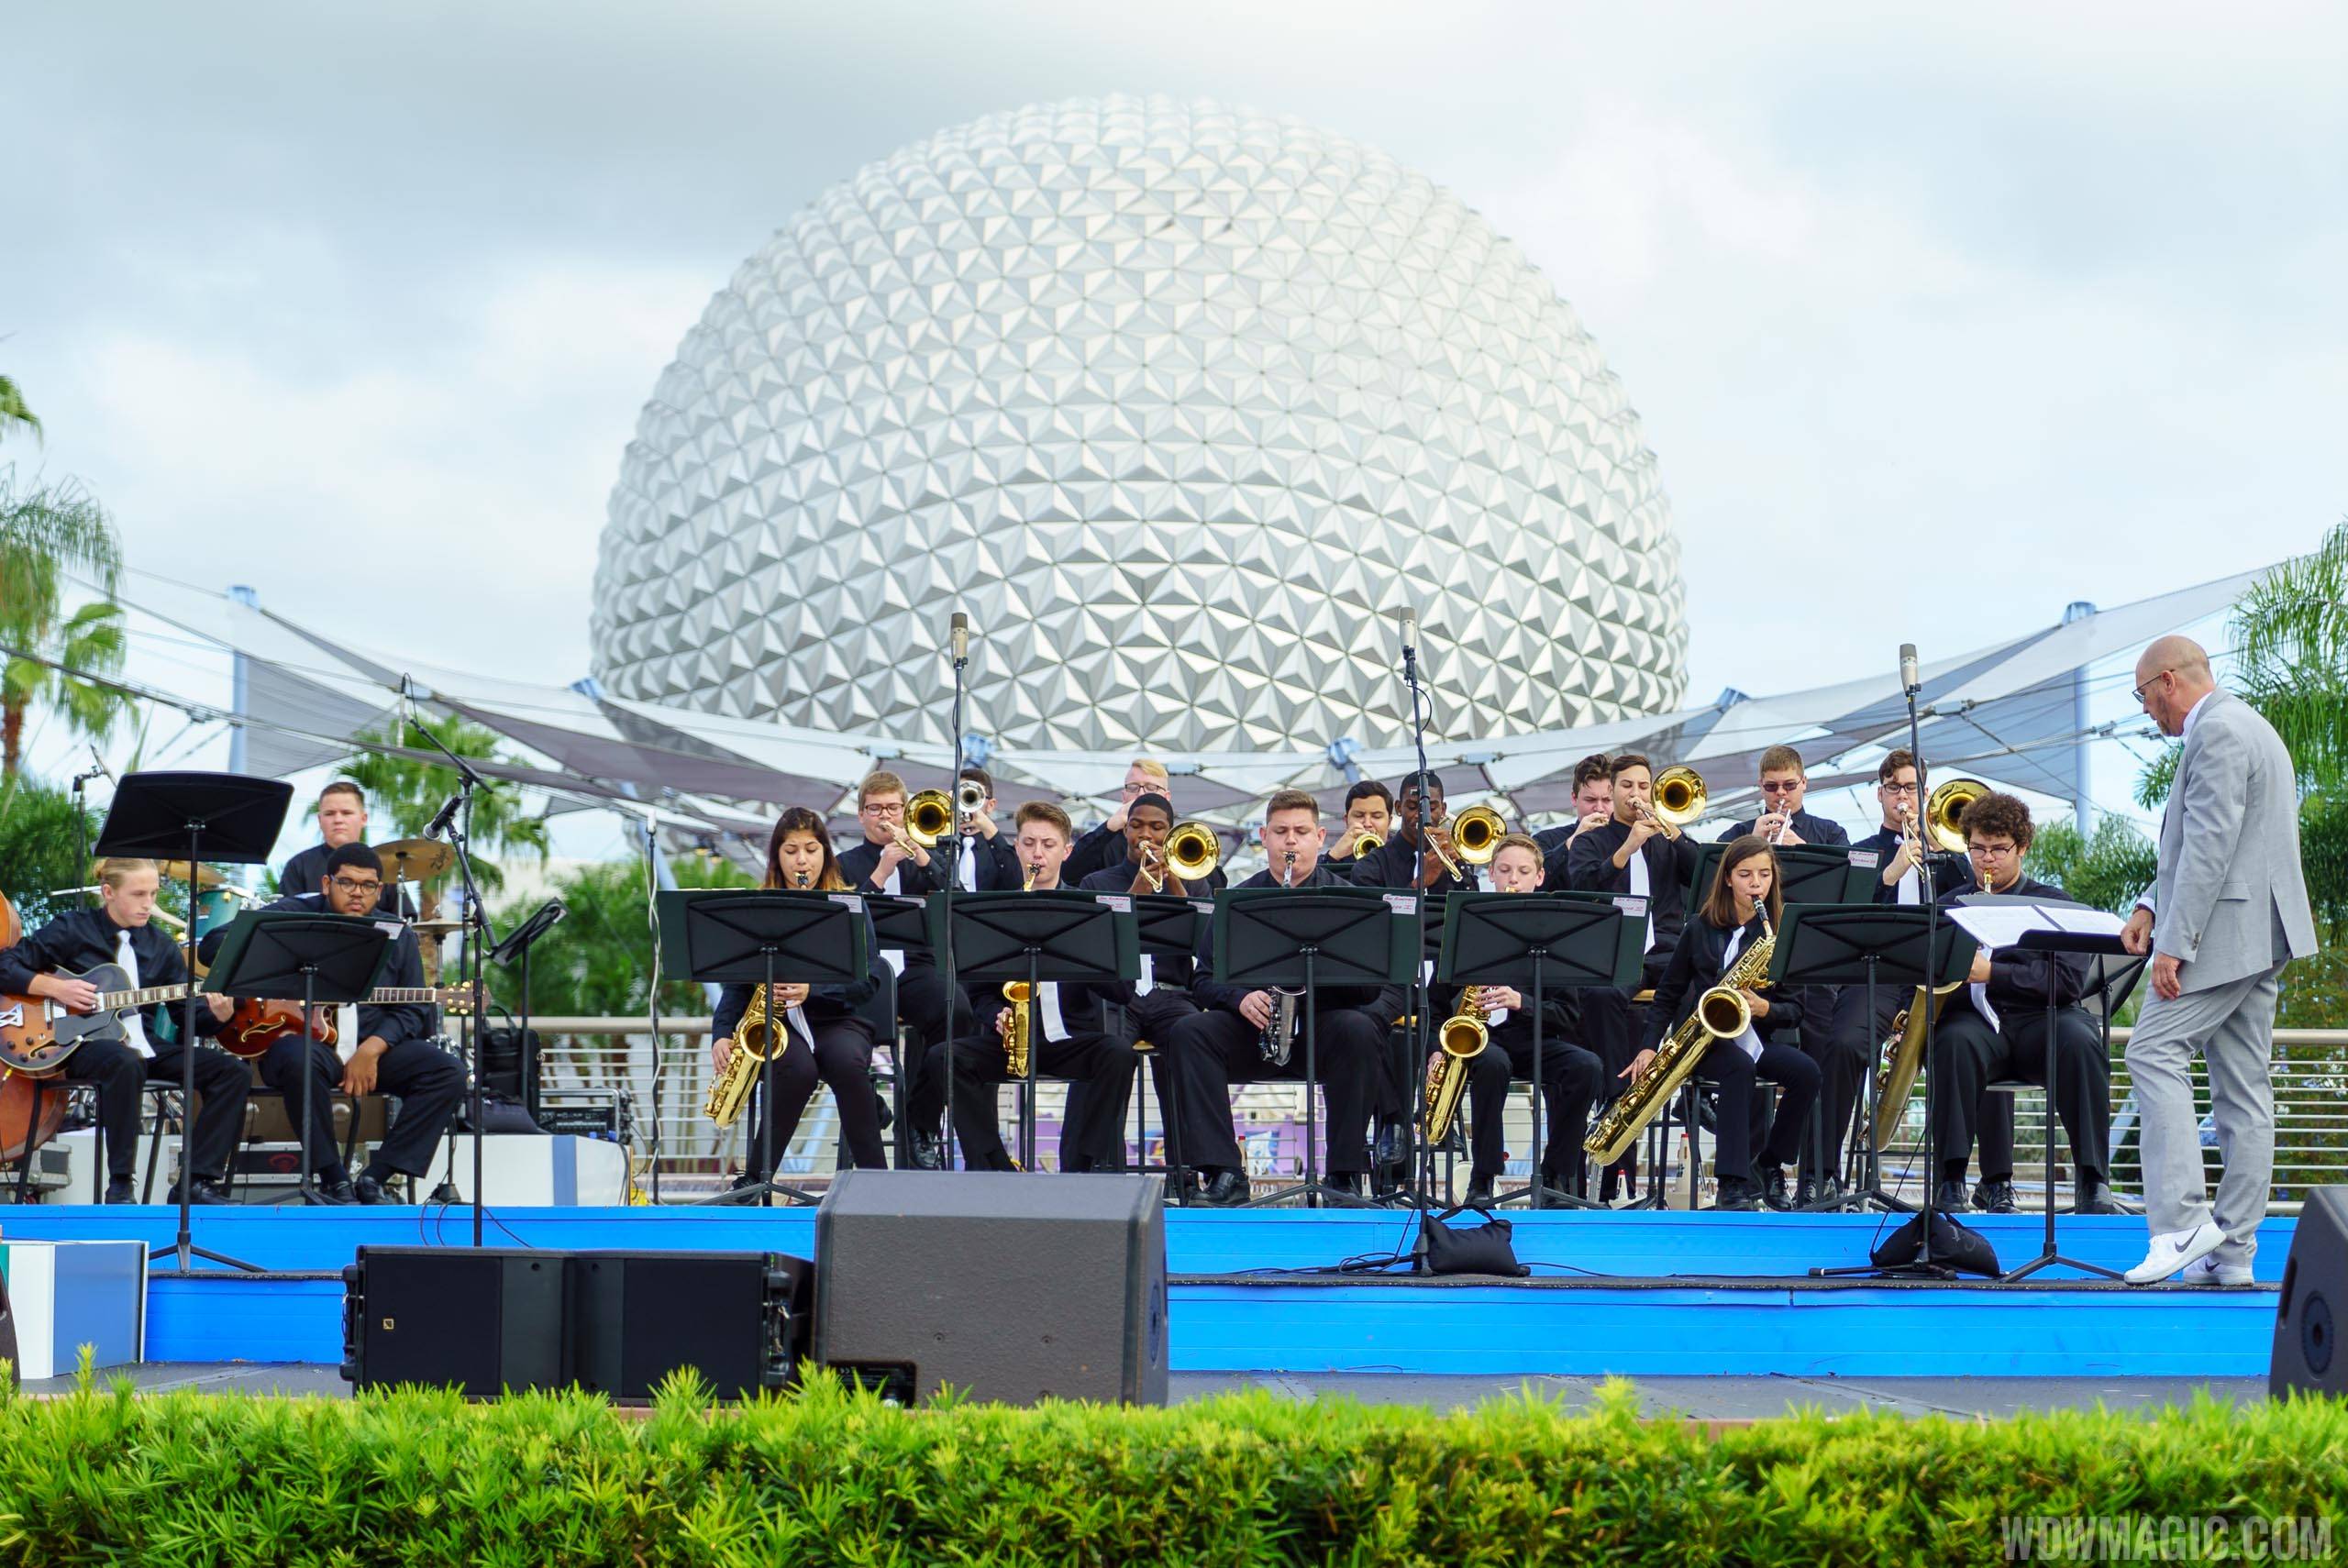 Epcot Festival of the Arts - Live band